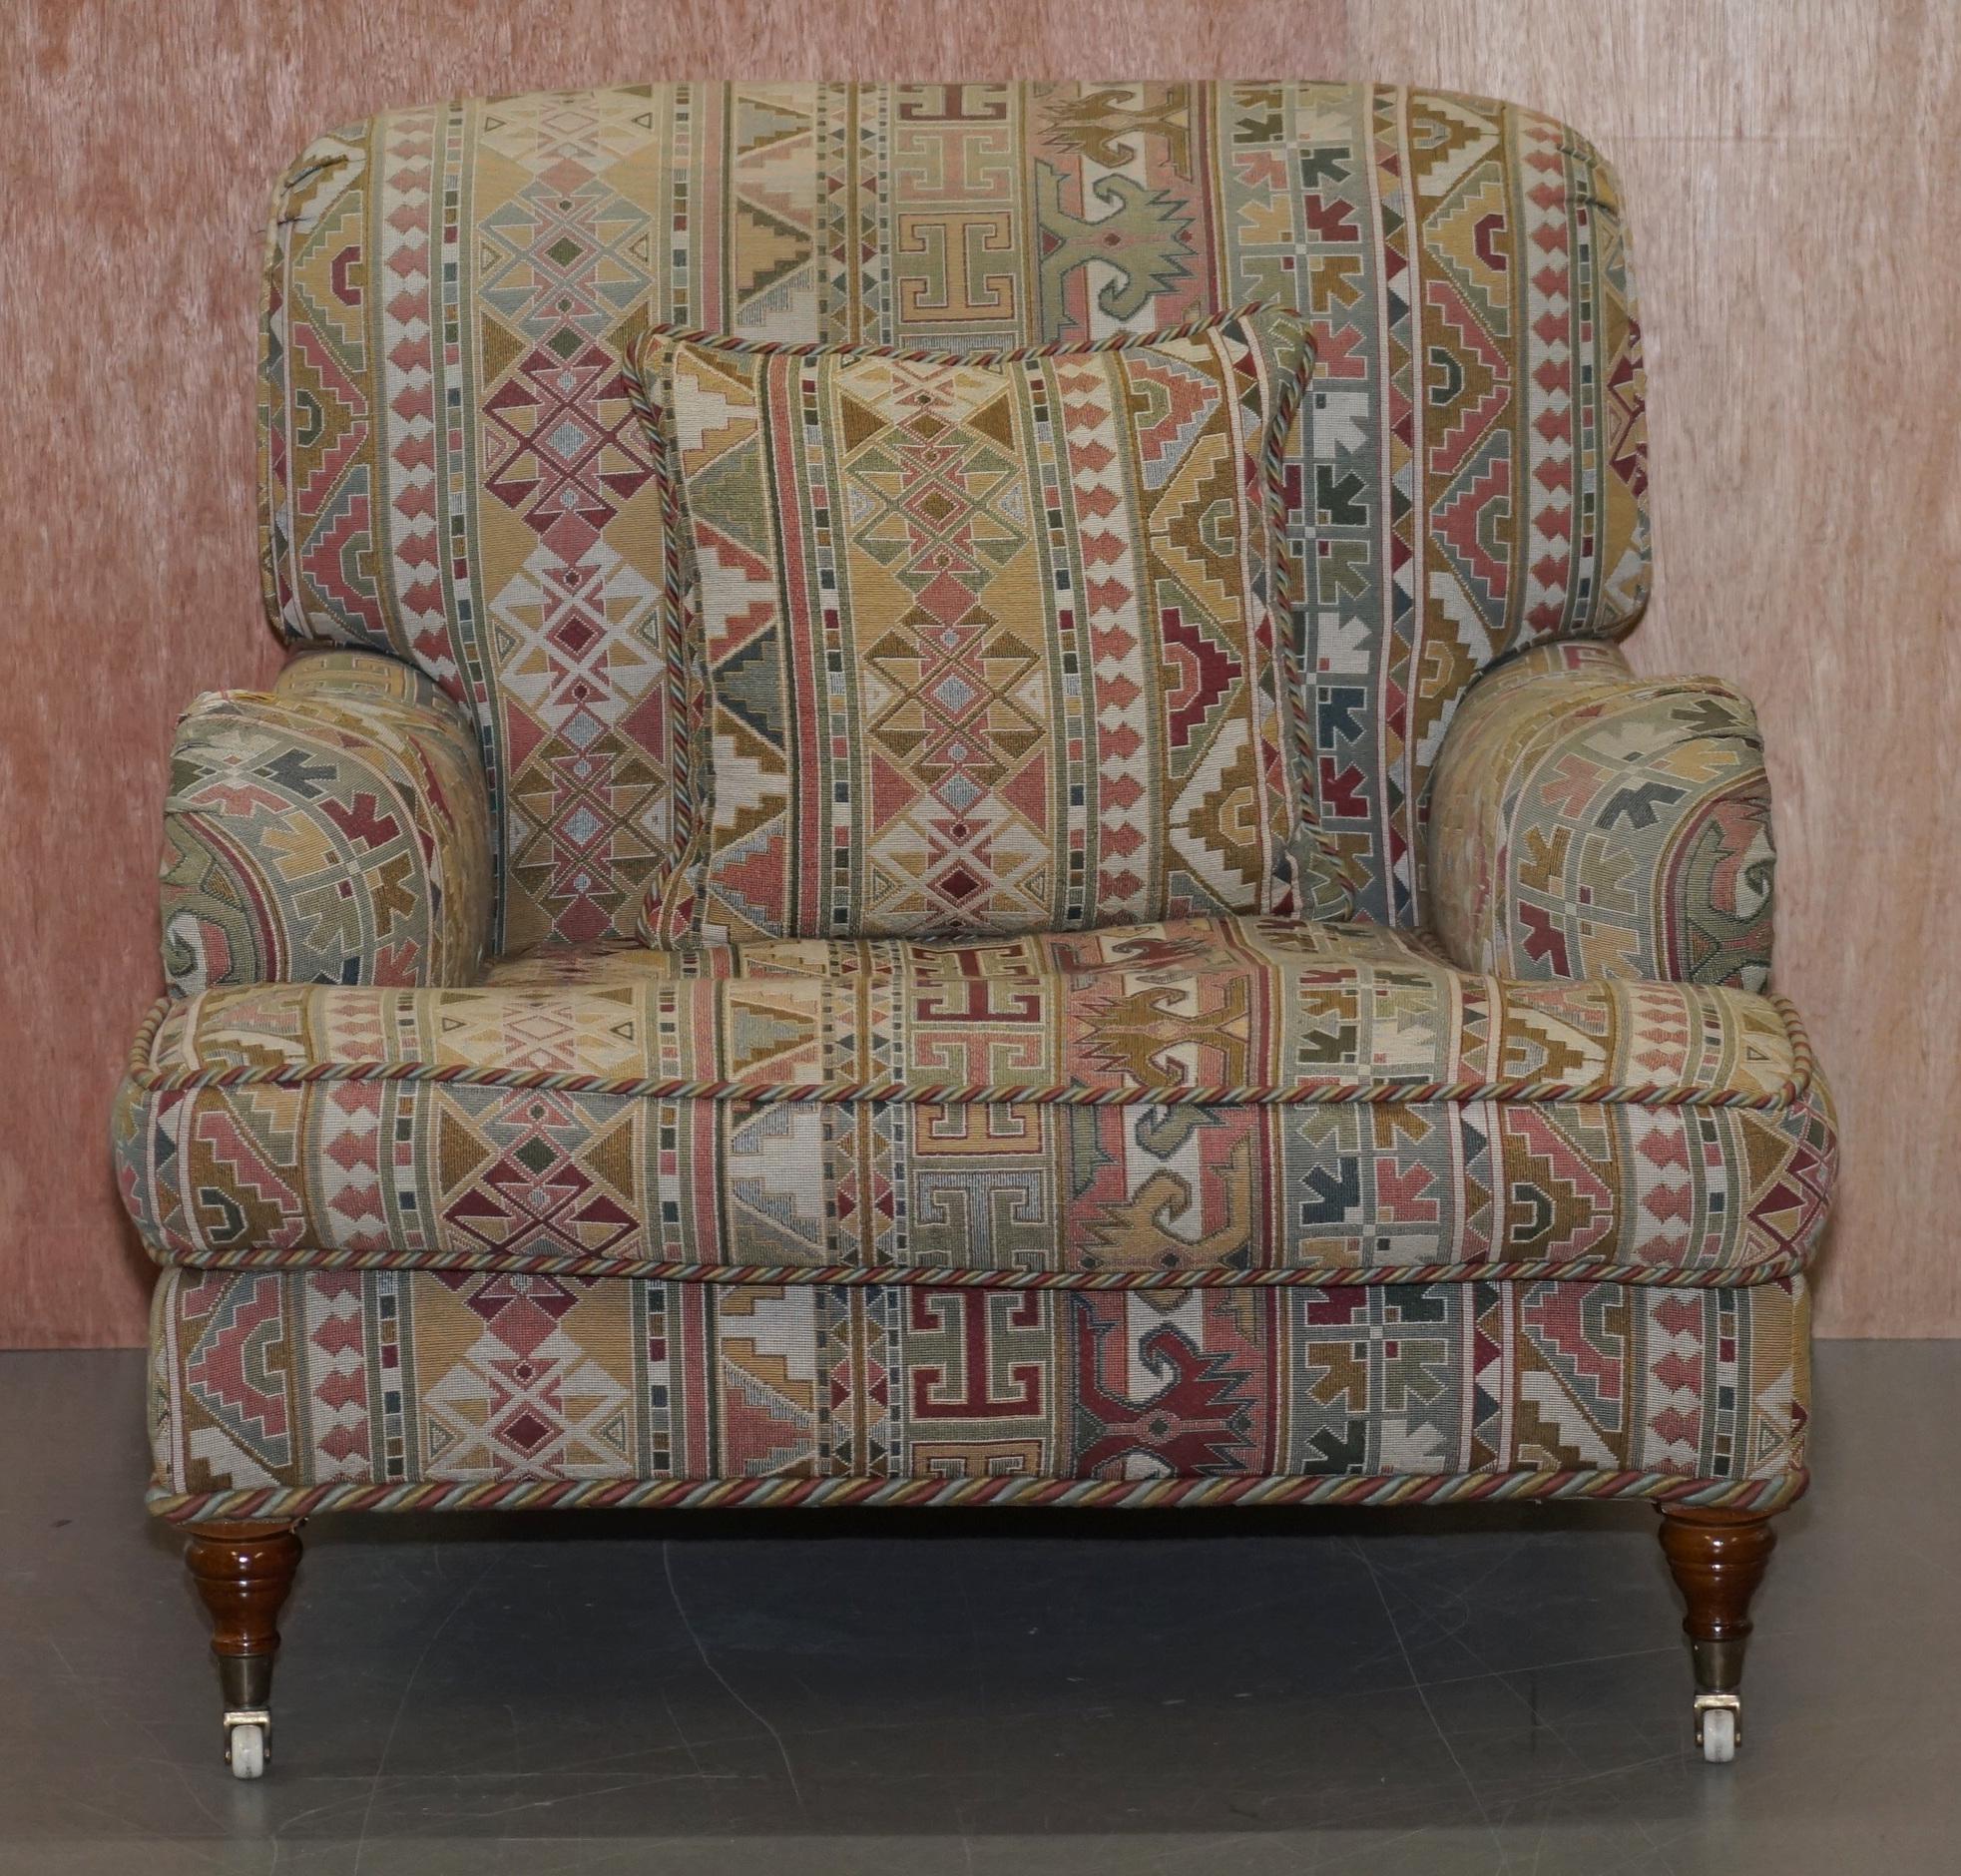 We are delighted to this lovely handmade in England Derwent Kilim pattern upholstery Howard armchair

I have the matching sofa listed under my other items

A very good looking decorative and well-made piece. The chair was made by Derwent and it